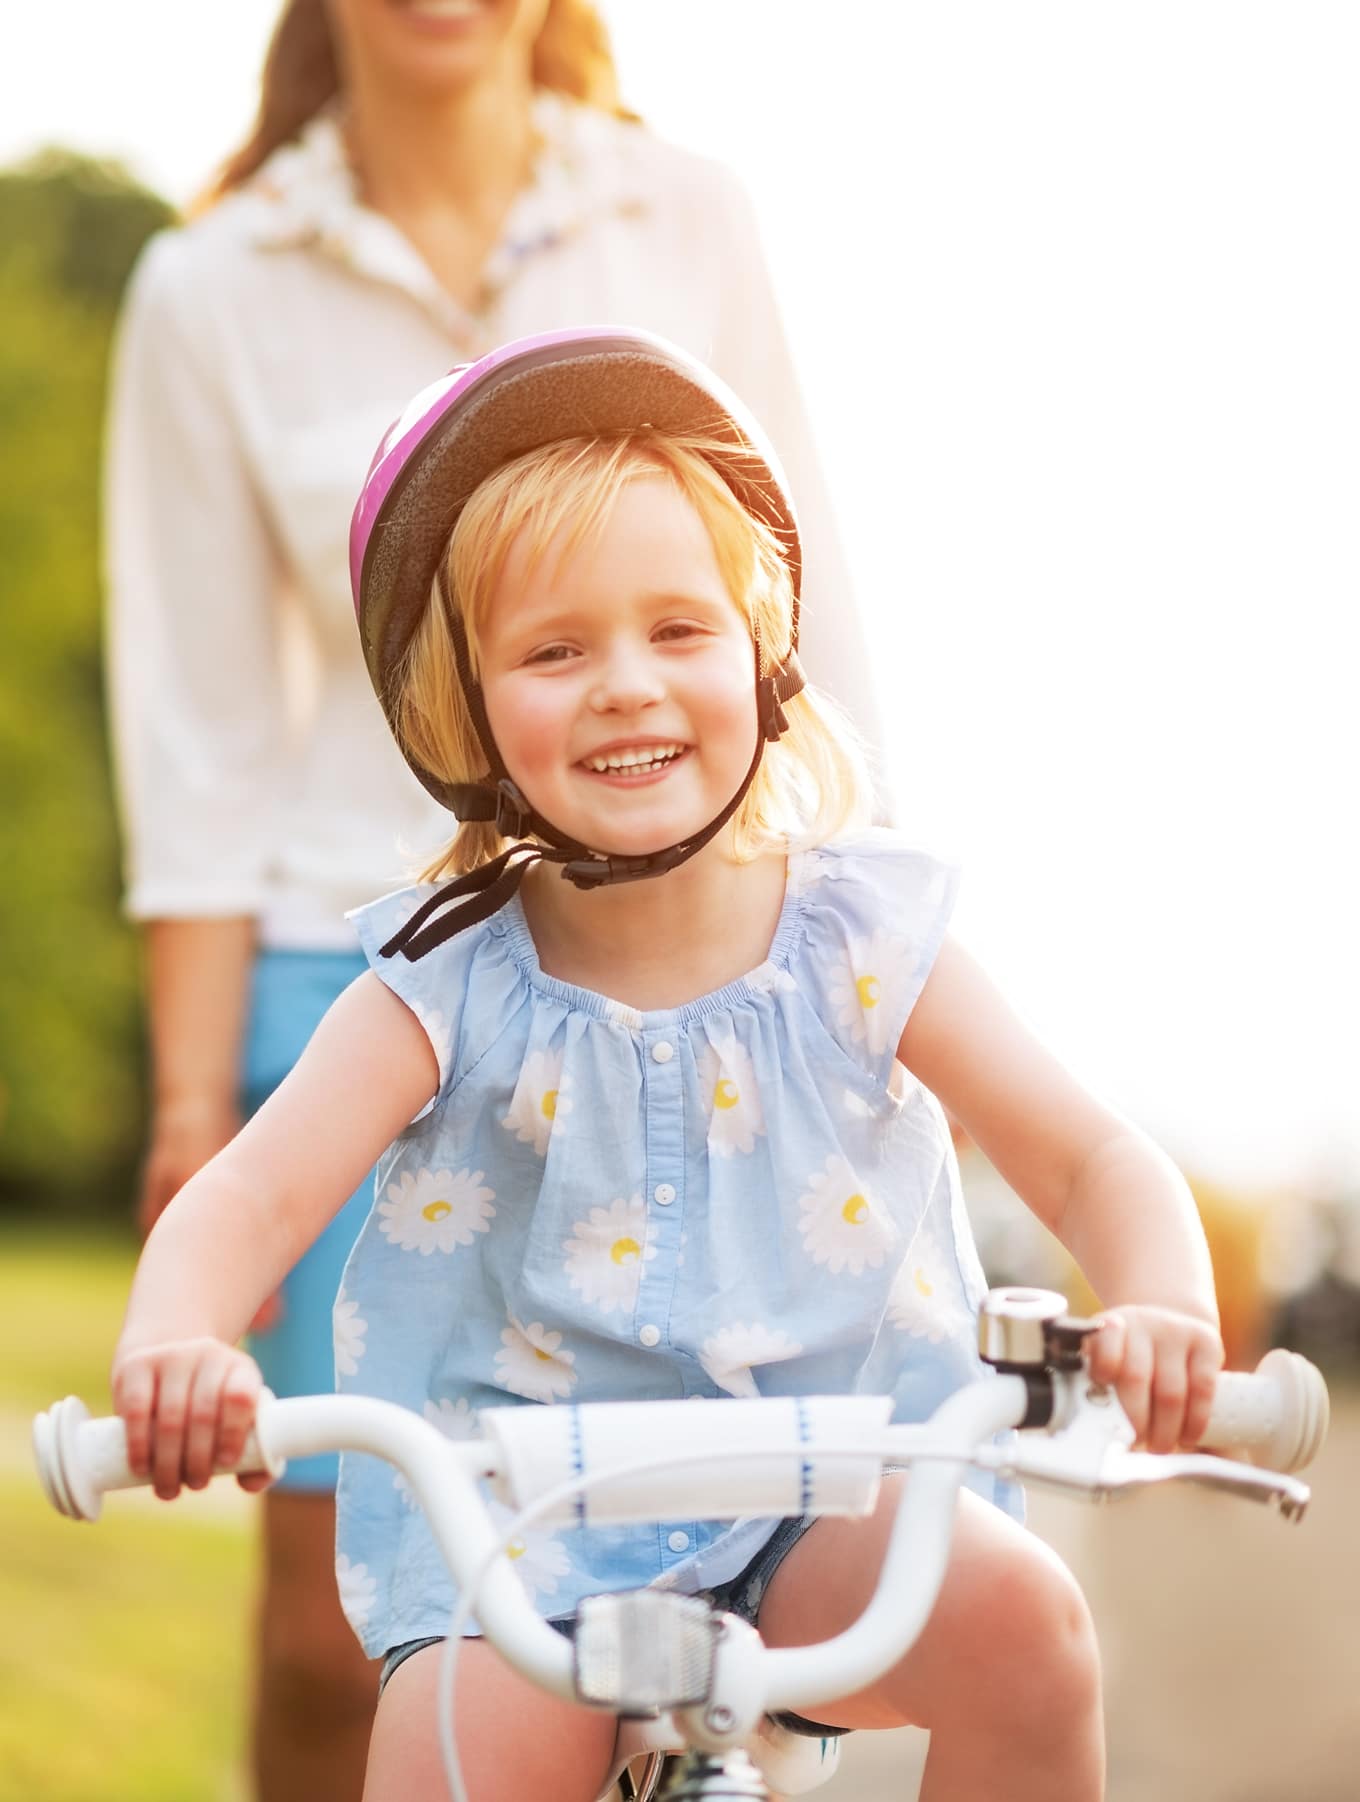 how to teach my kid to ride a bike without training wheels